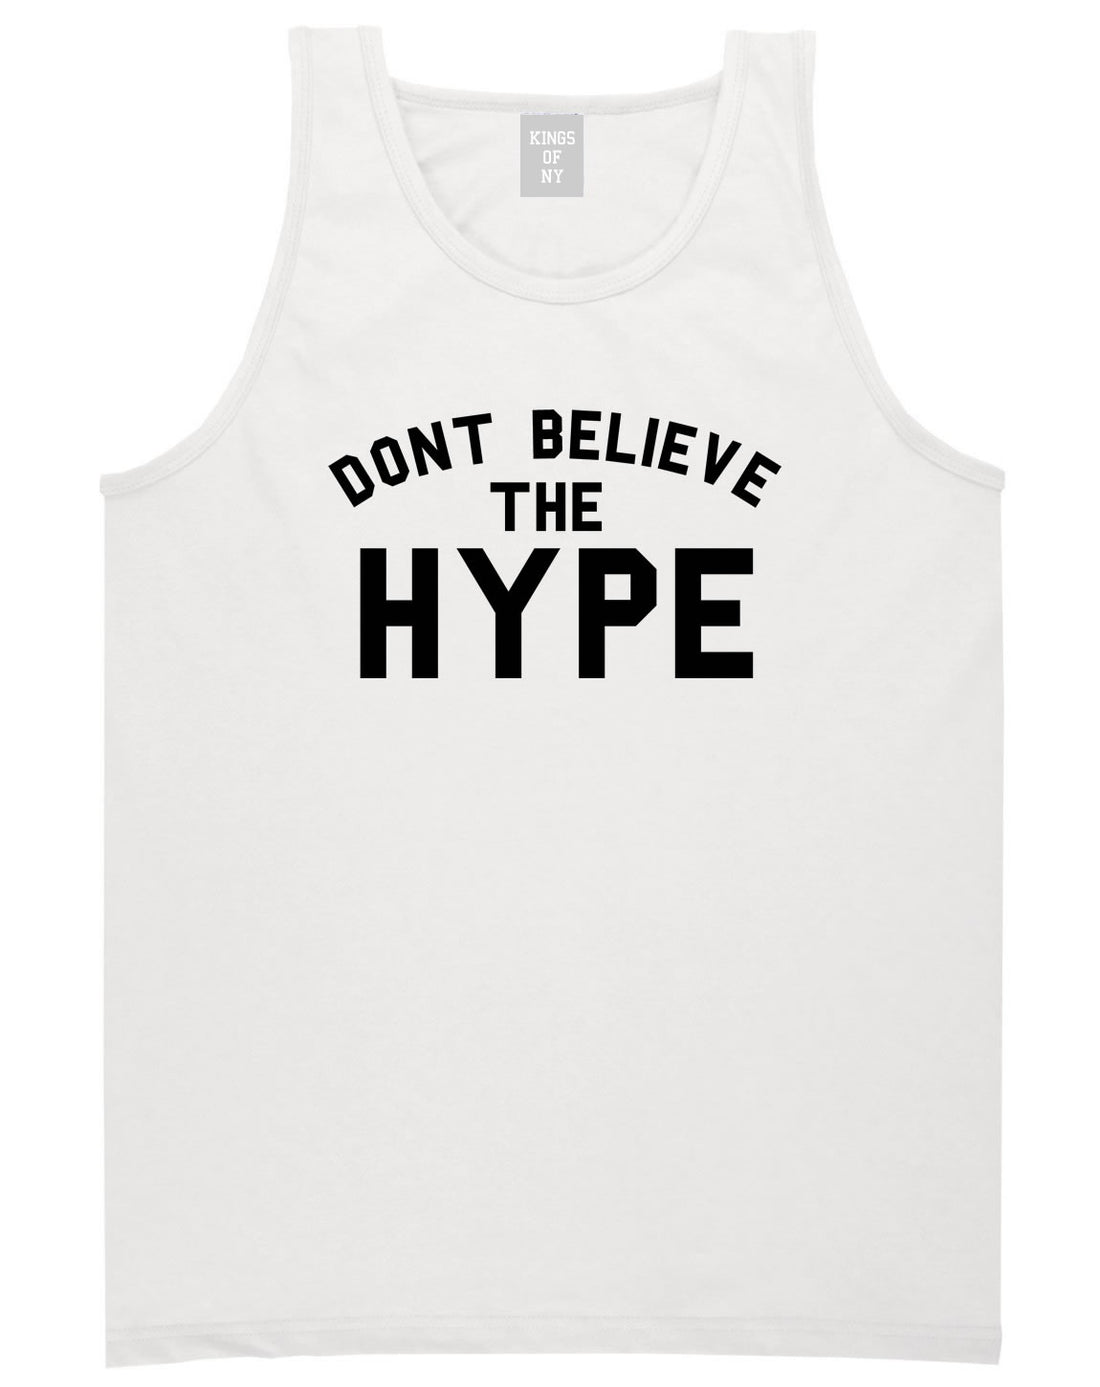 Don't Believe The Hype Tank Top in White By Kings Of NY